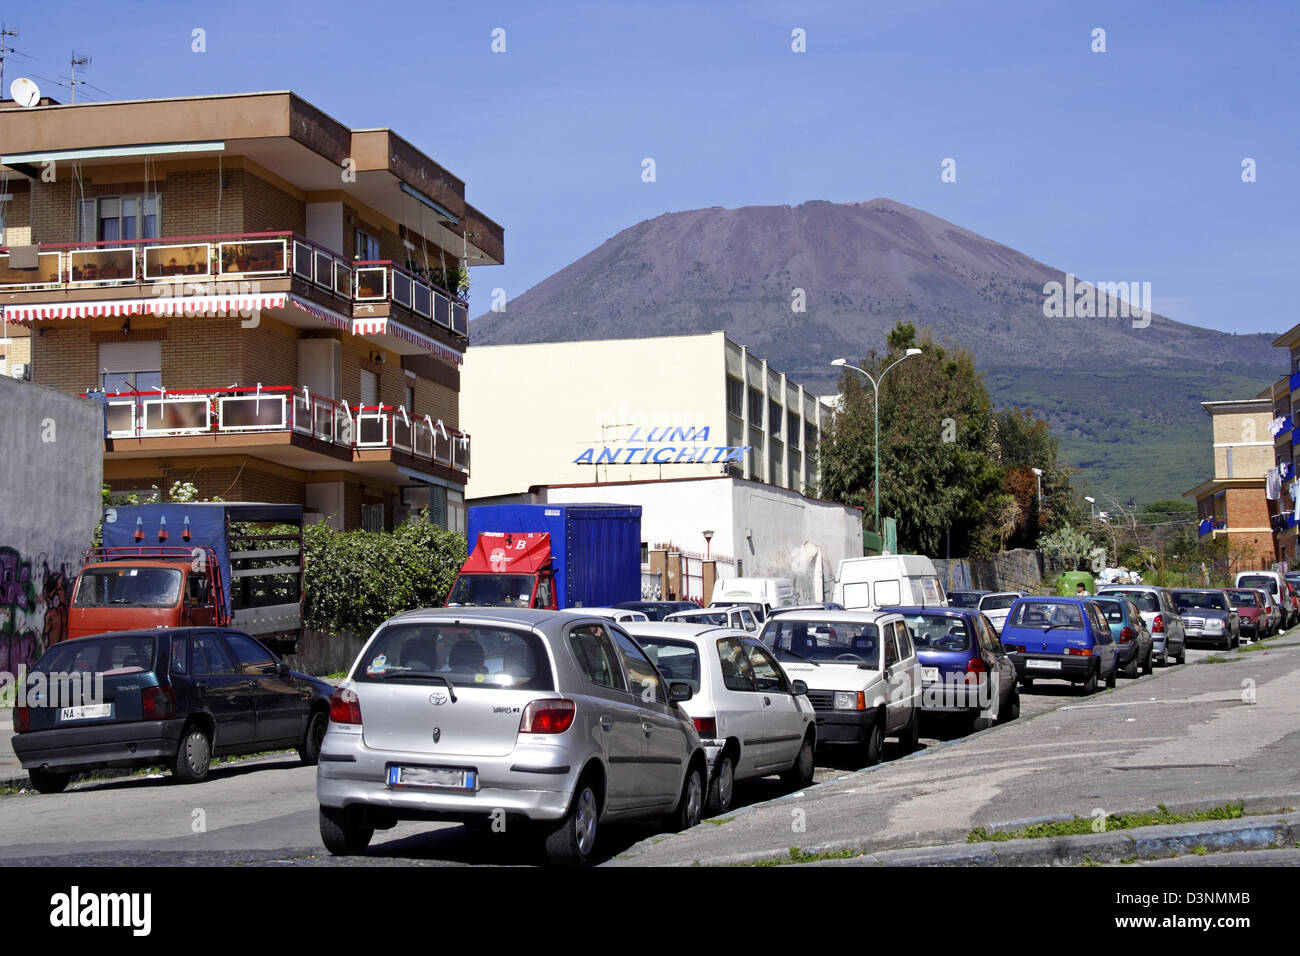 The photo shows a street scene in Torre Annunziata beneath the Vesuvius, Italy, 01 April 2006. The residential areas near the vulcano are divided into different zones. On the first indications of an eruption the red zone will beevacuated first. The Italian government tries the persuade the people to move to more secure regions by financial incentives. Photo: Lars Halbauer Stock Photo